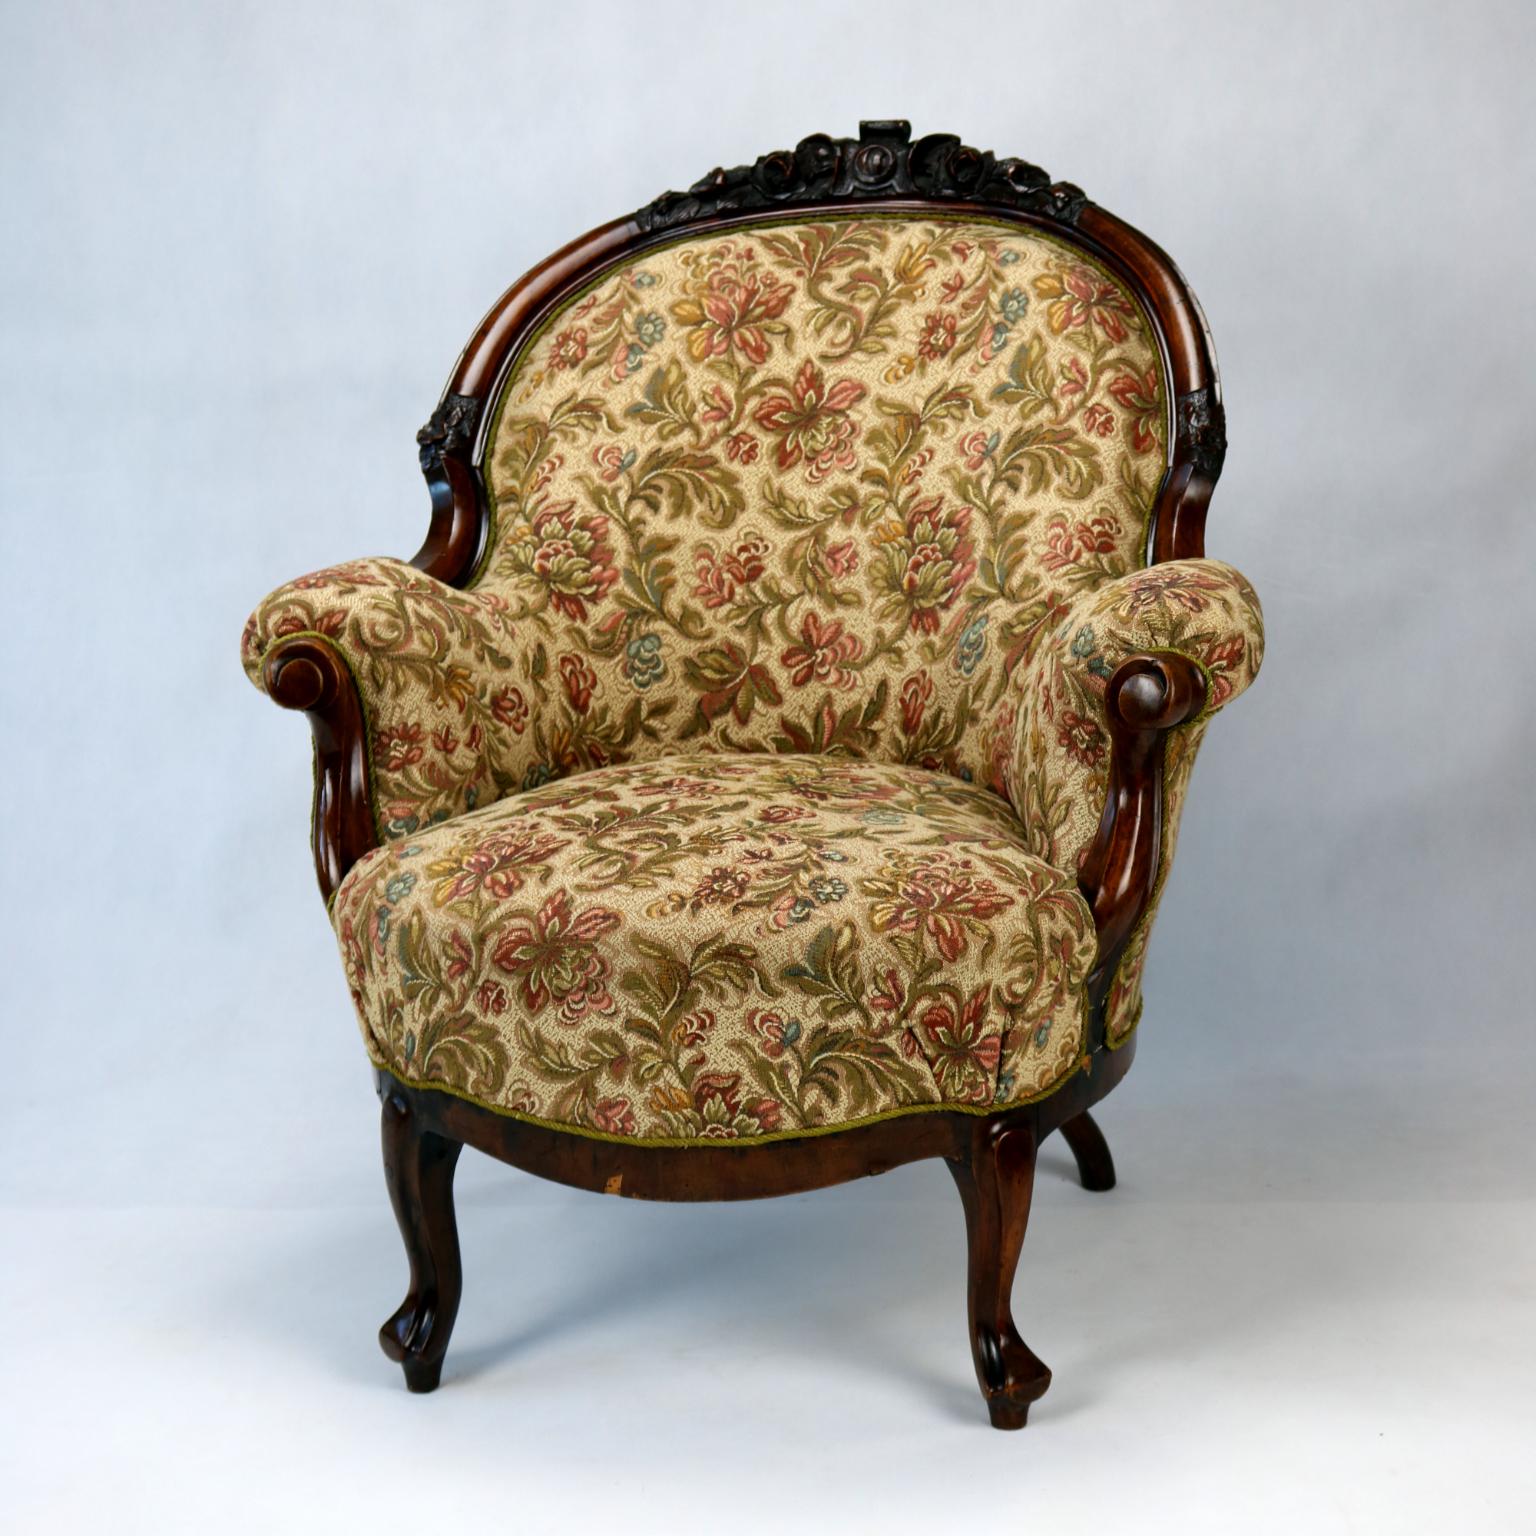 Carved walnut armchair from the second half of 19th century, Austria, Hungary.